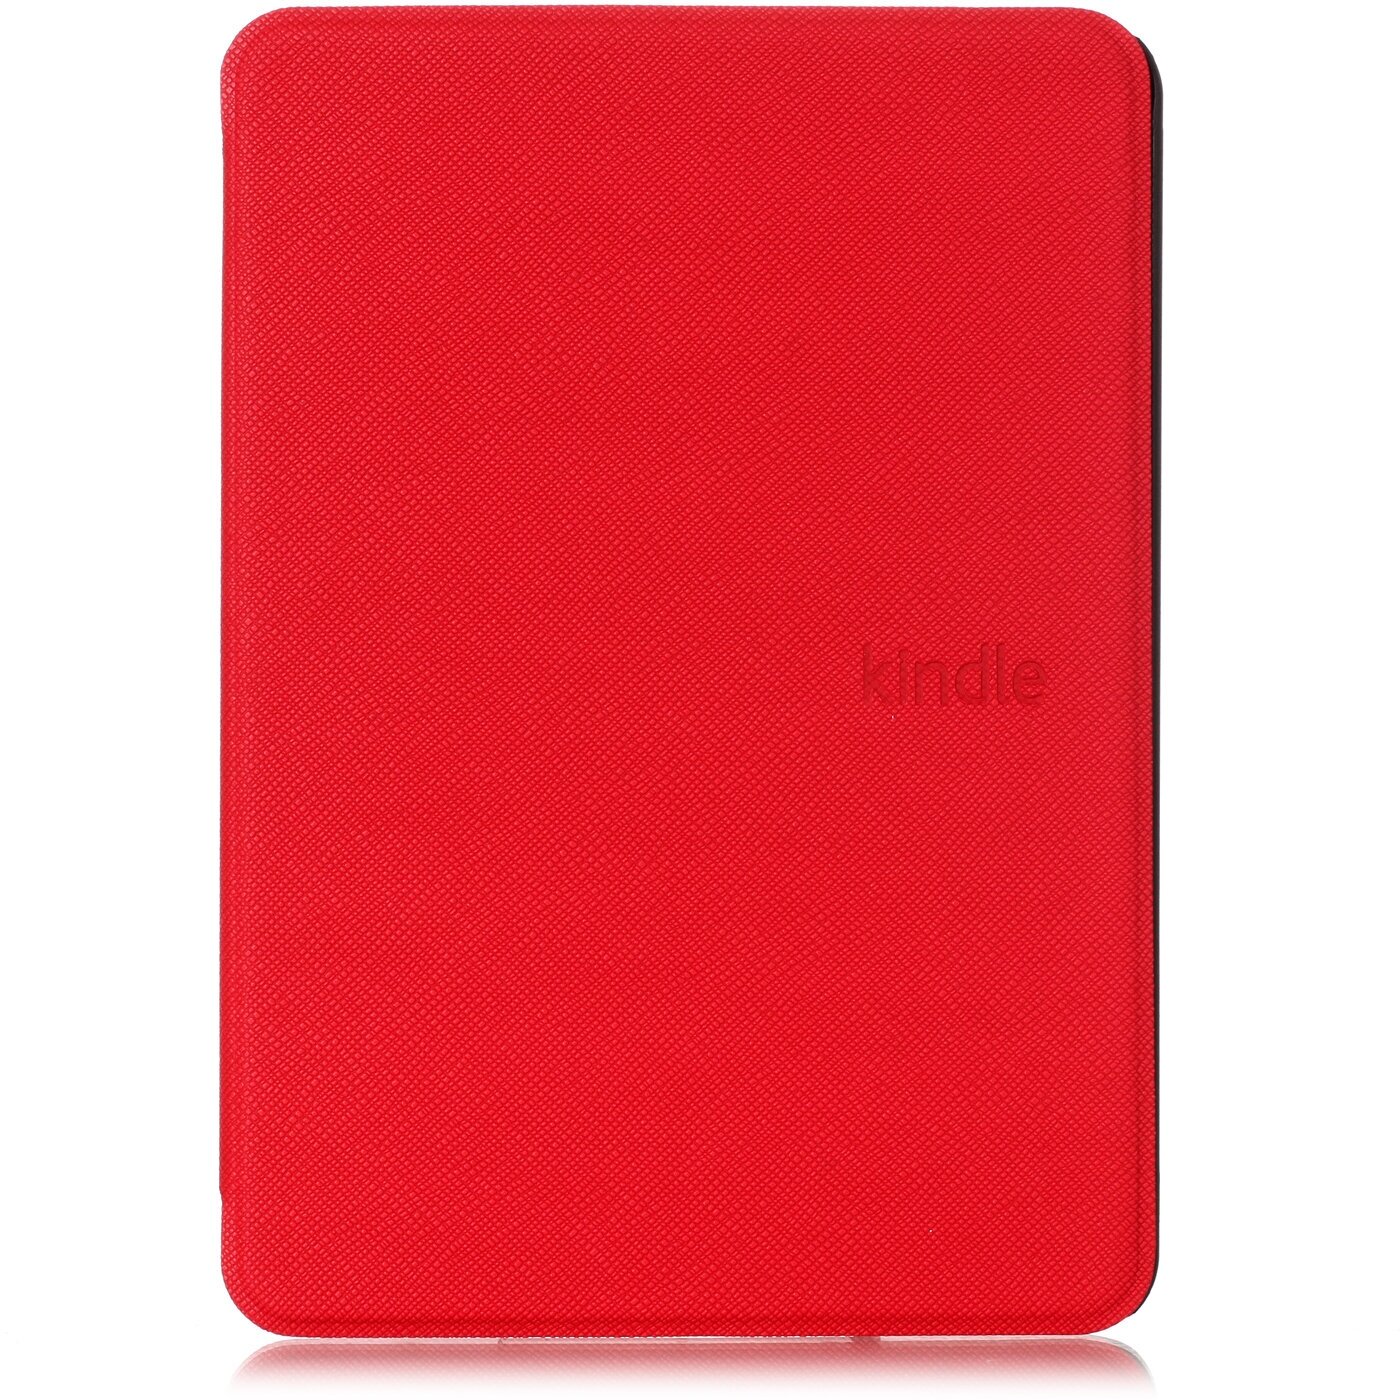 -  Amazon Kindle PaperWhite 2018 red